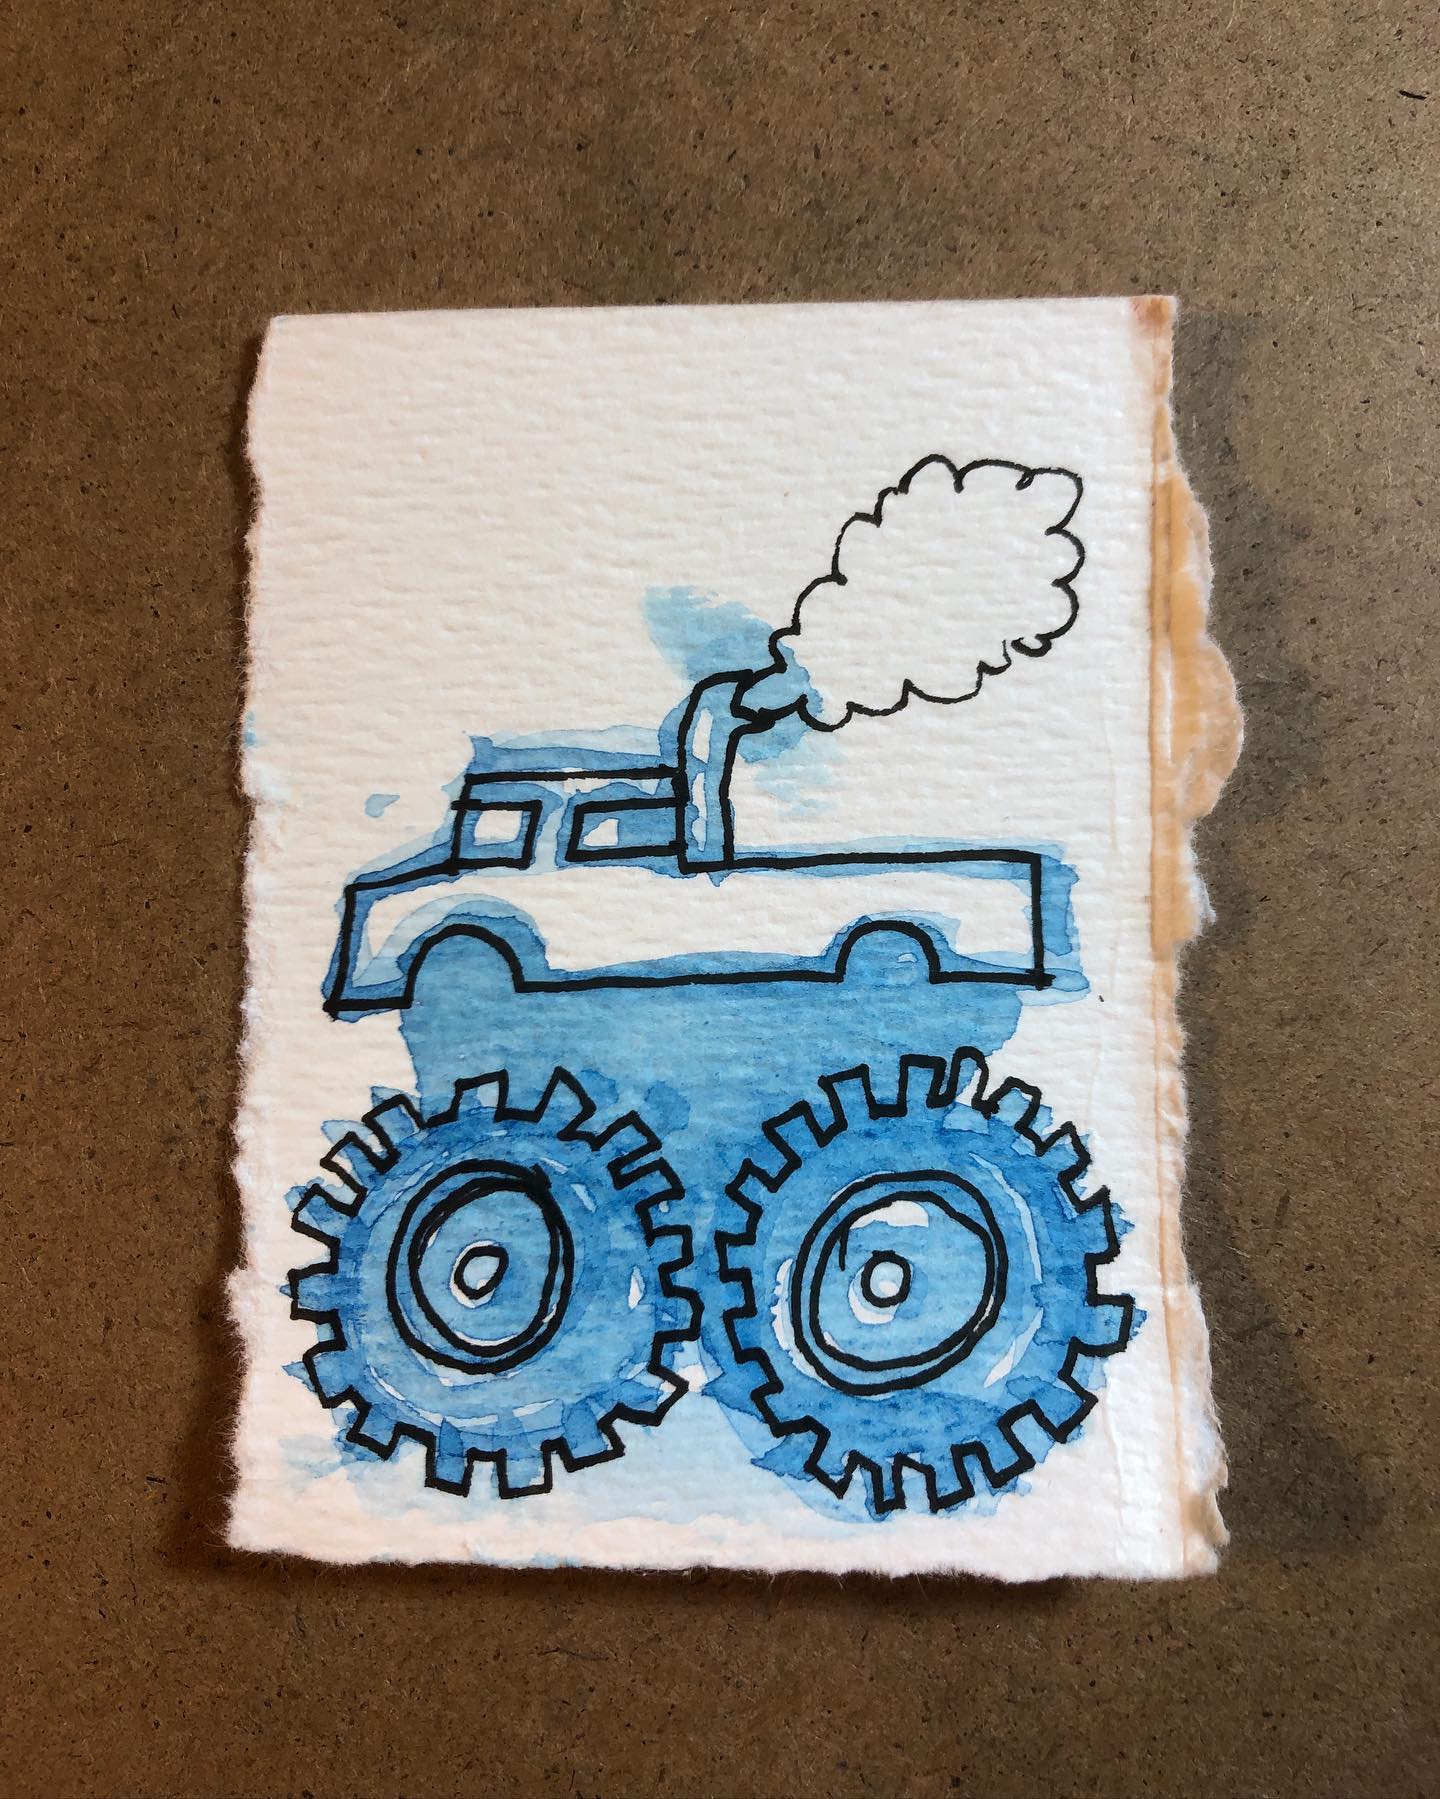 Watercolor and ink drawing of a truck with oversized tires and excessive exhaust out of a vertical pipe